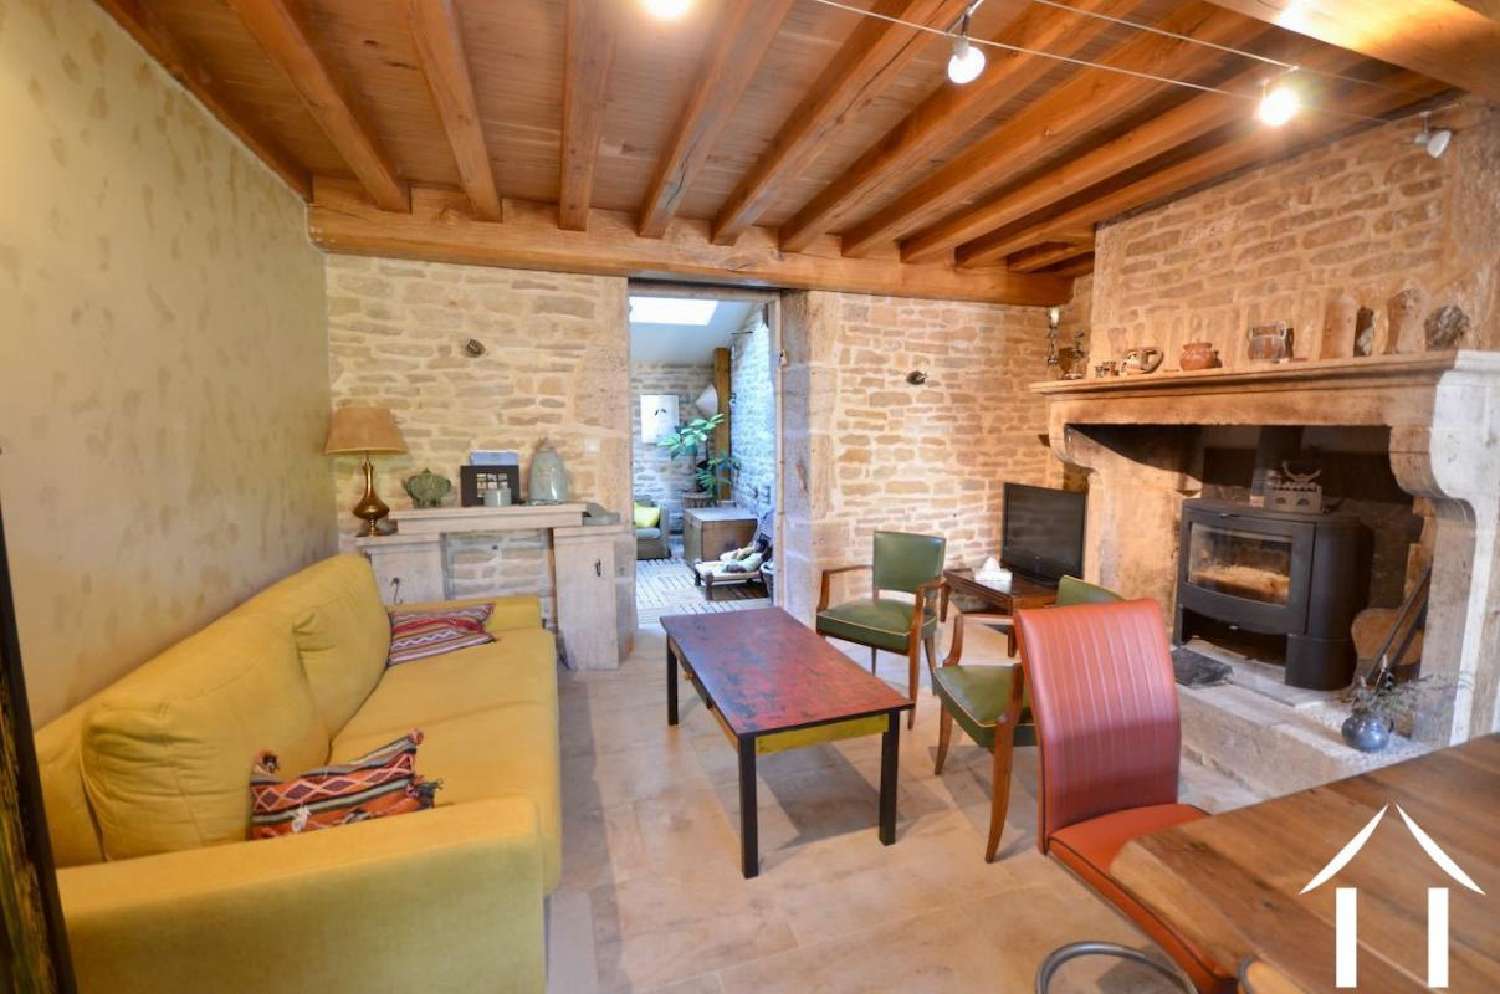  for sale bed and breakfast Aignay-le-Duc Côte-d'Or 3